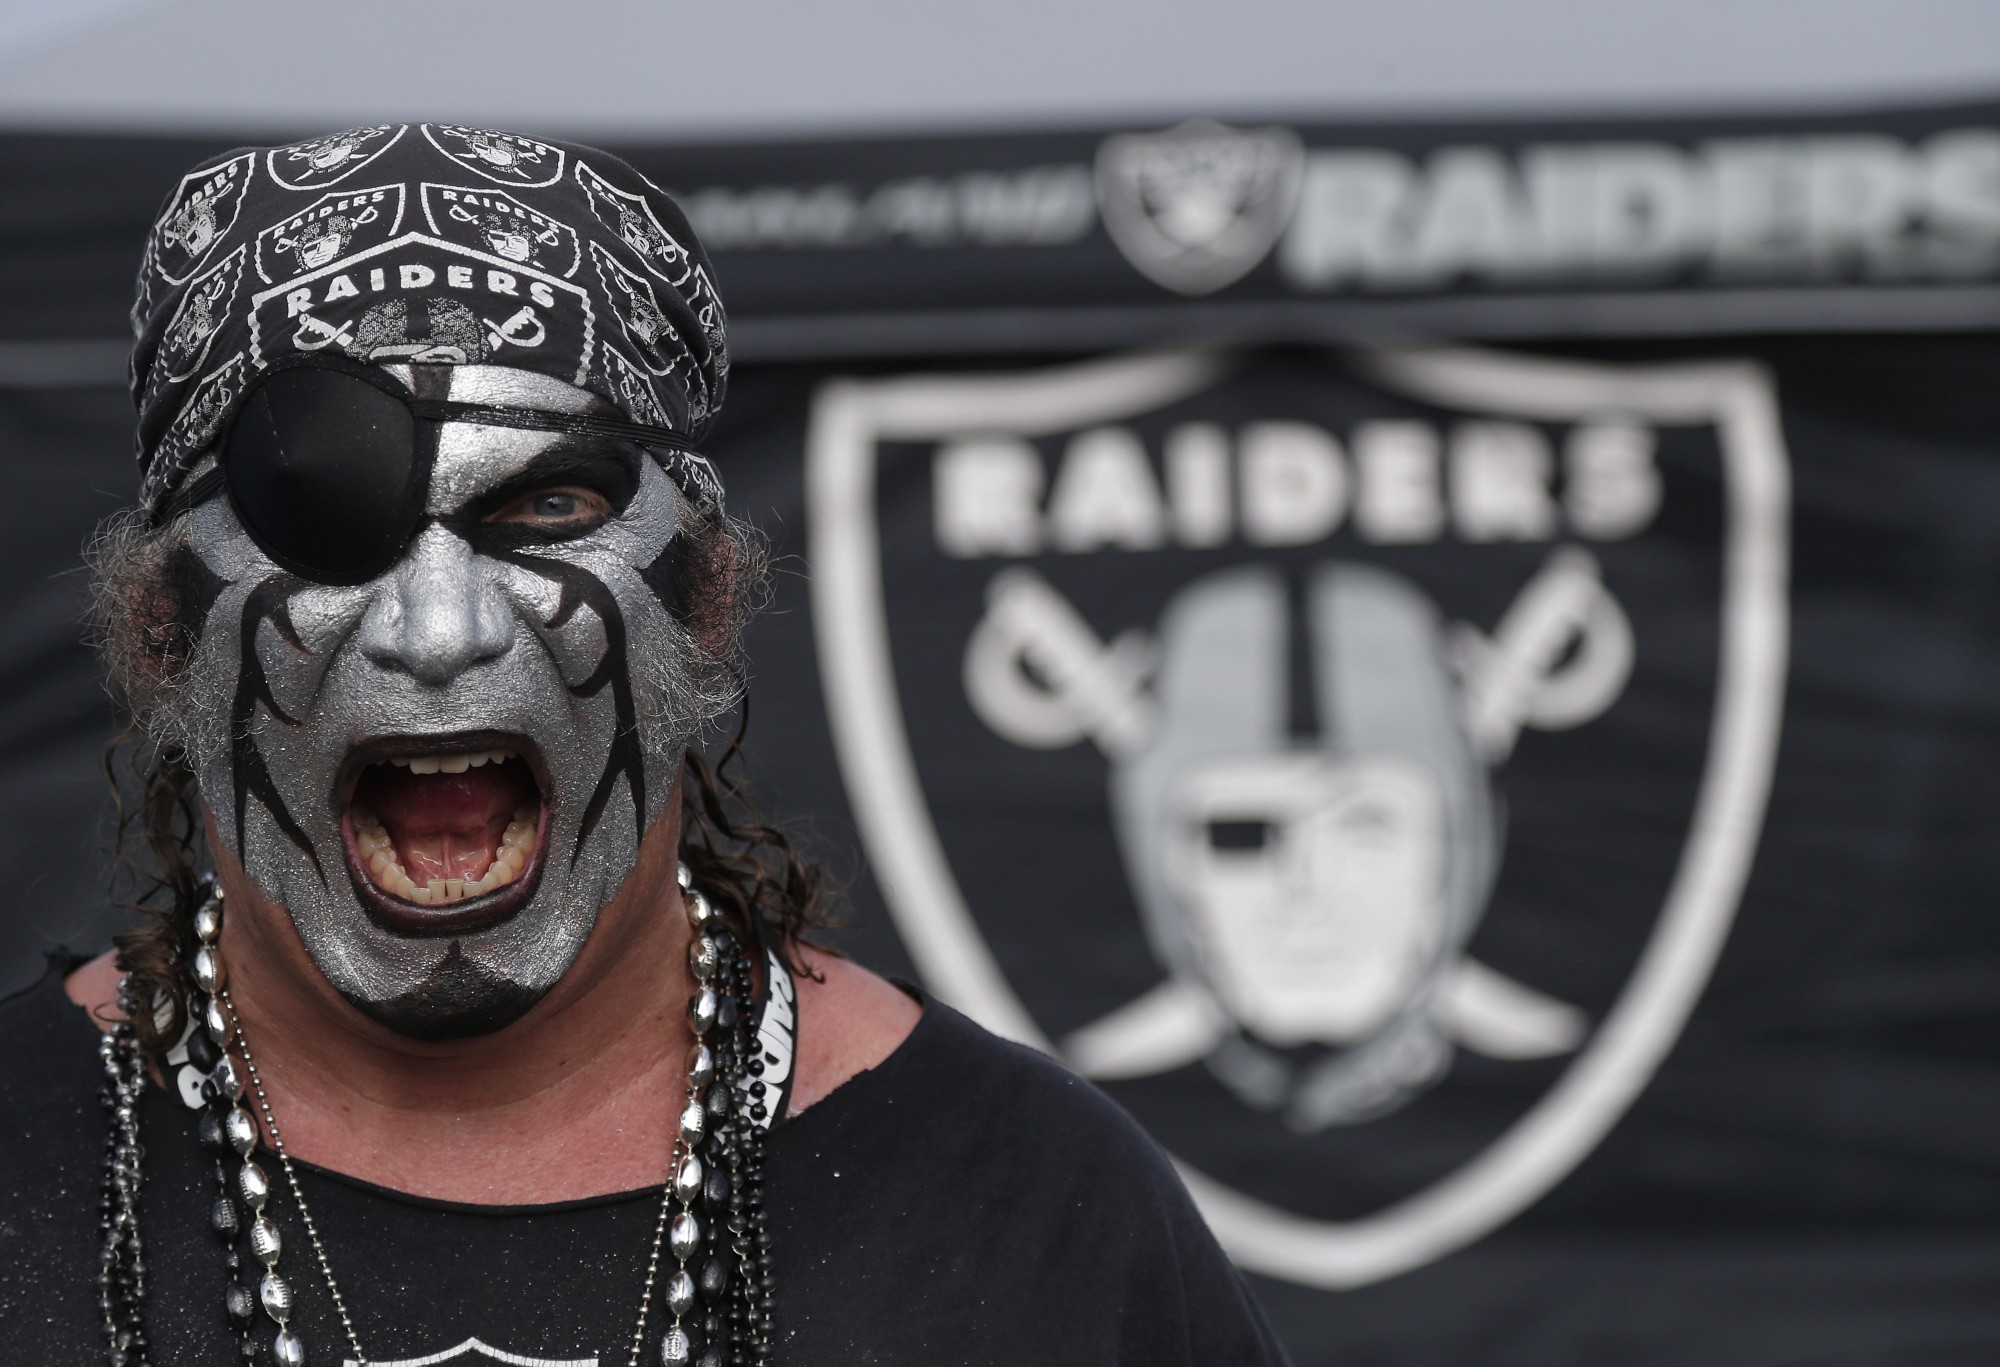 Oakland Raiders wallpaper ·① Download free awesome full HD ...